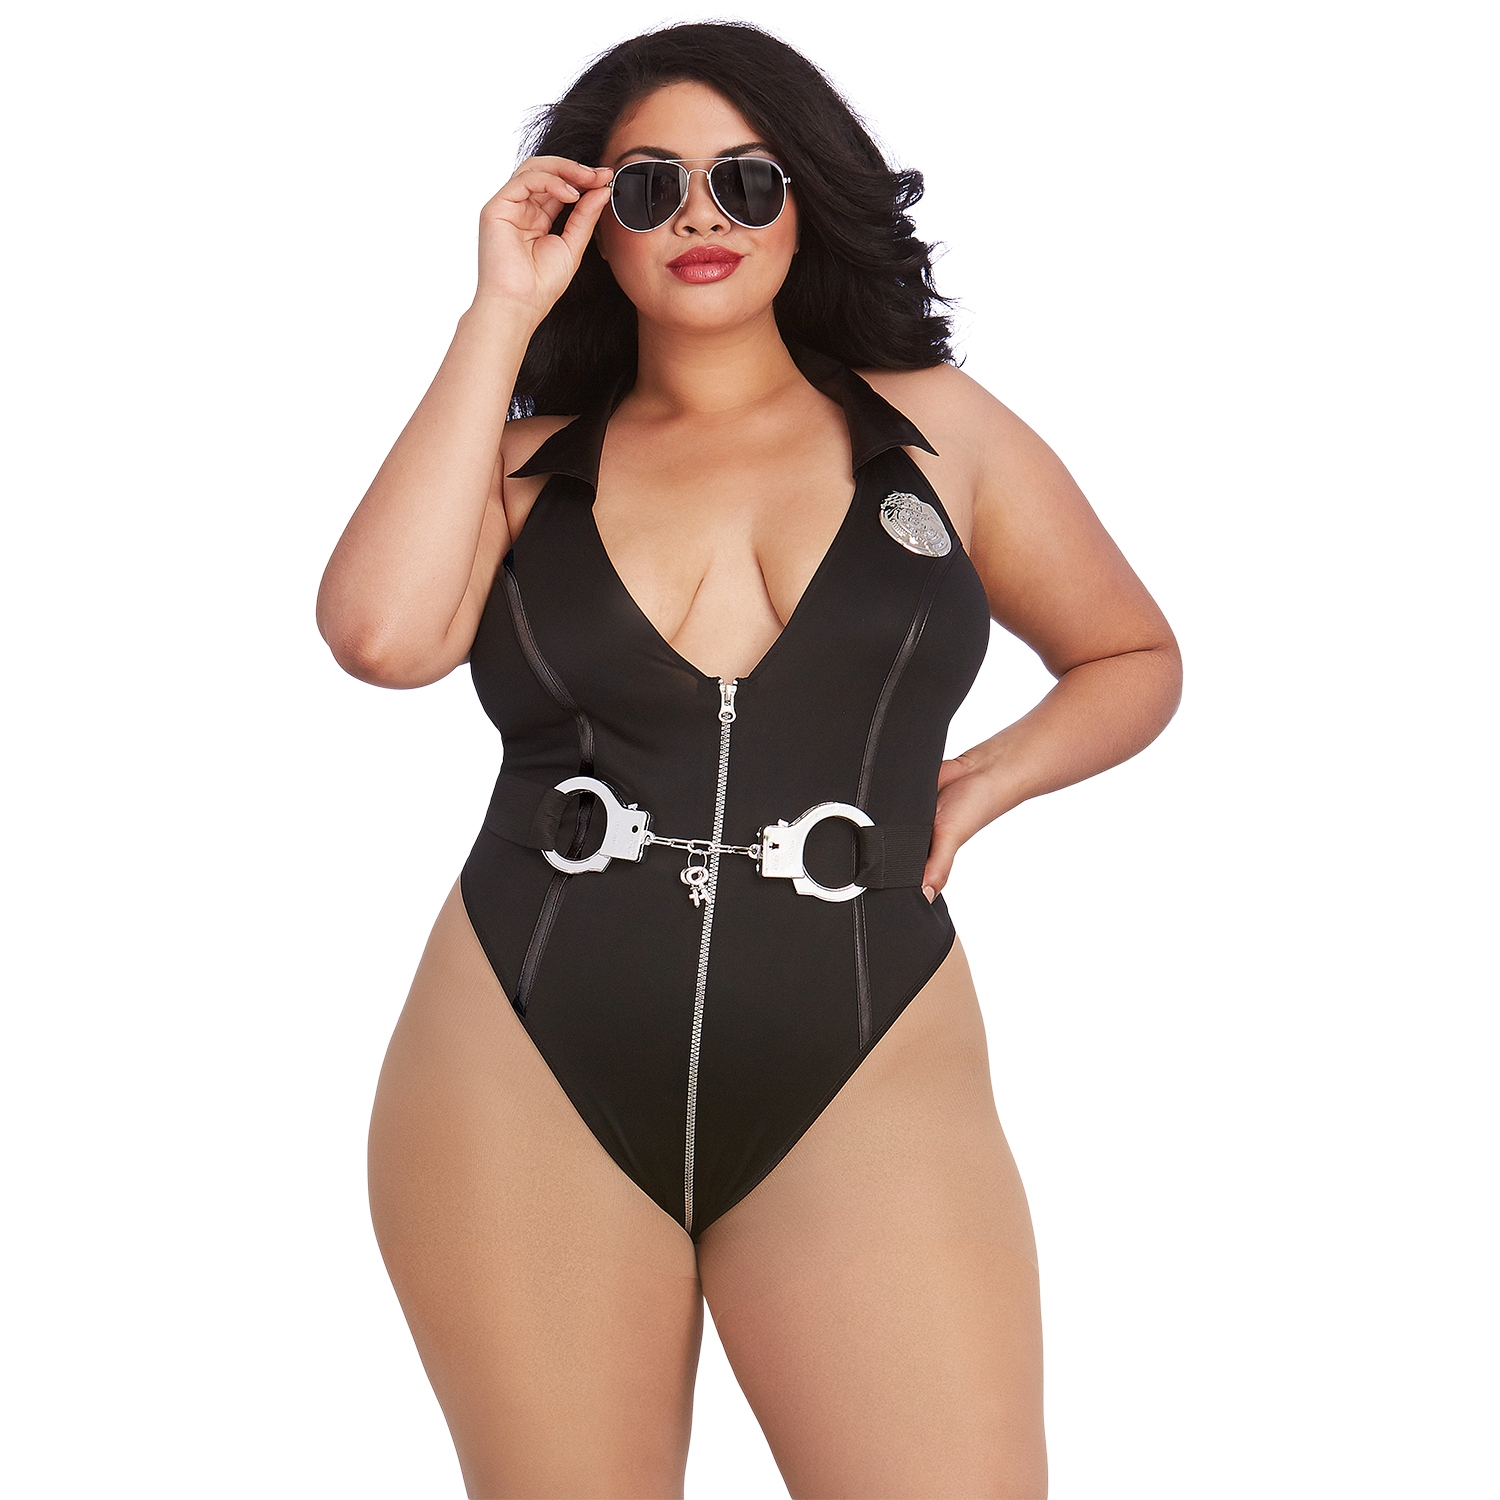 Dreamgirl Plus Size Politi Teddy      - Sort - One Size Queen thumbnail